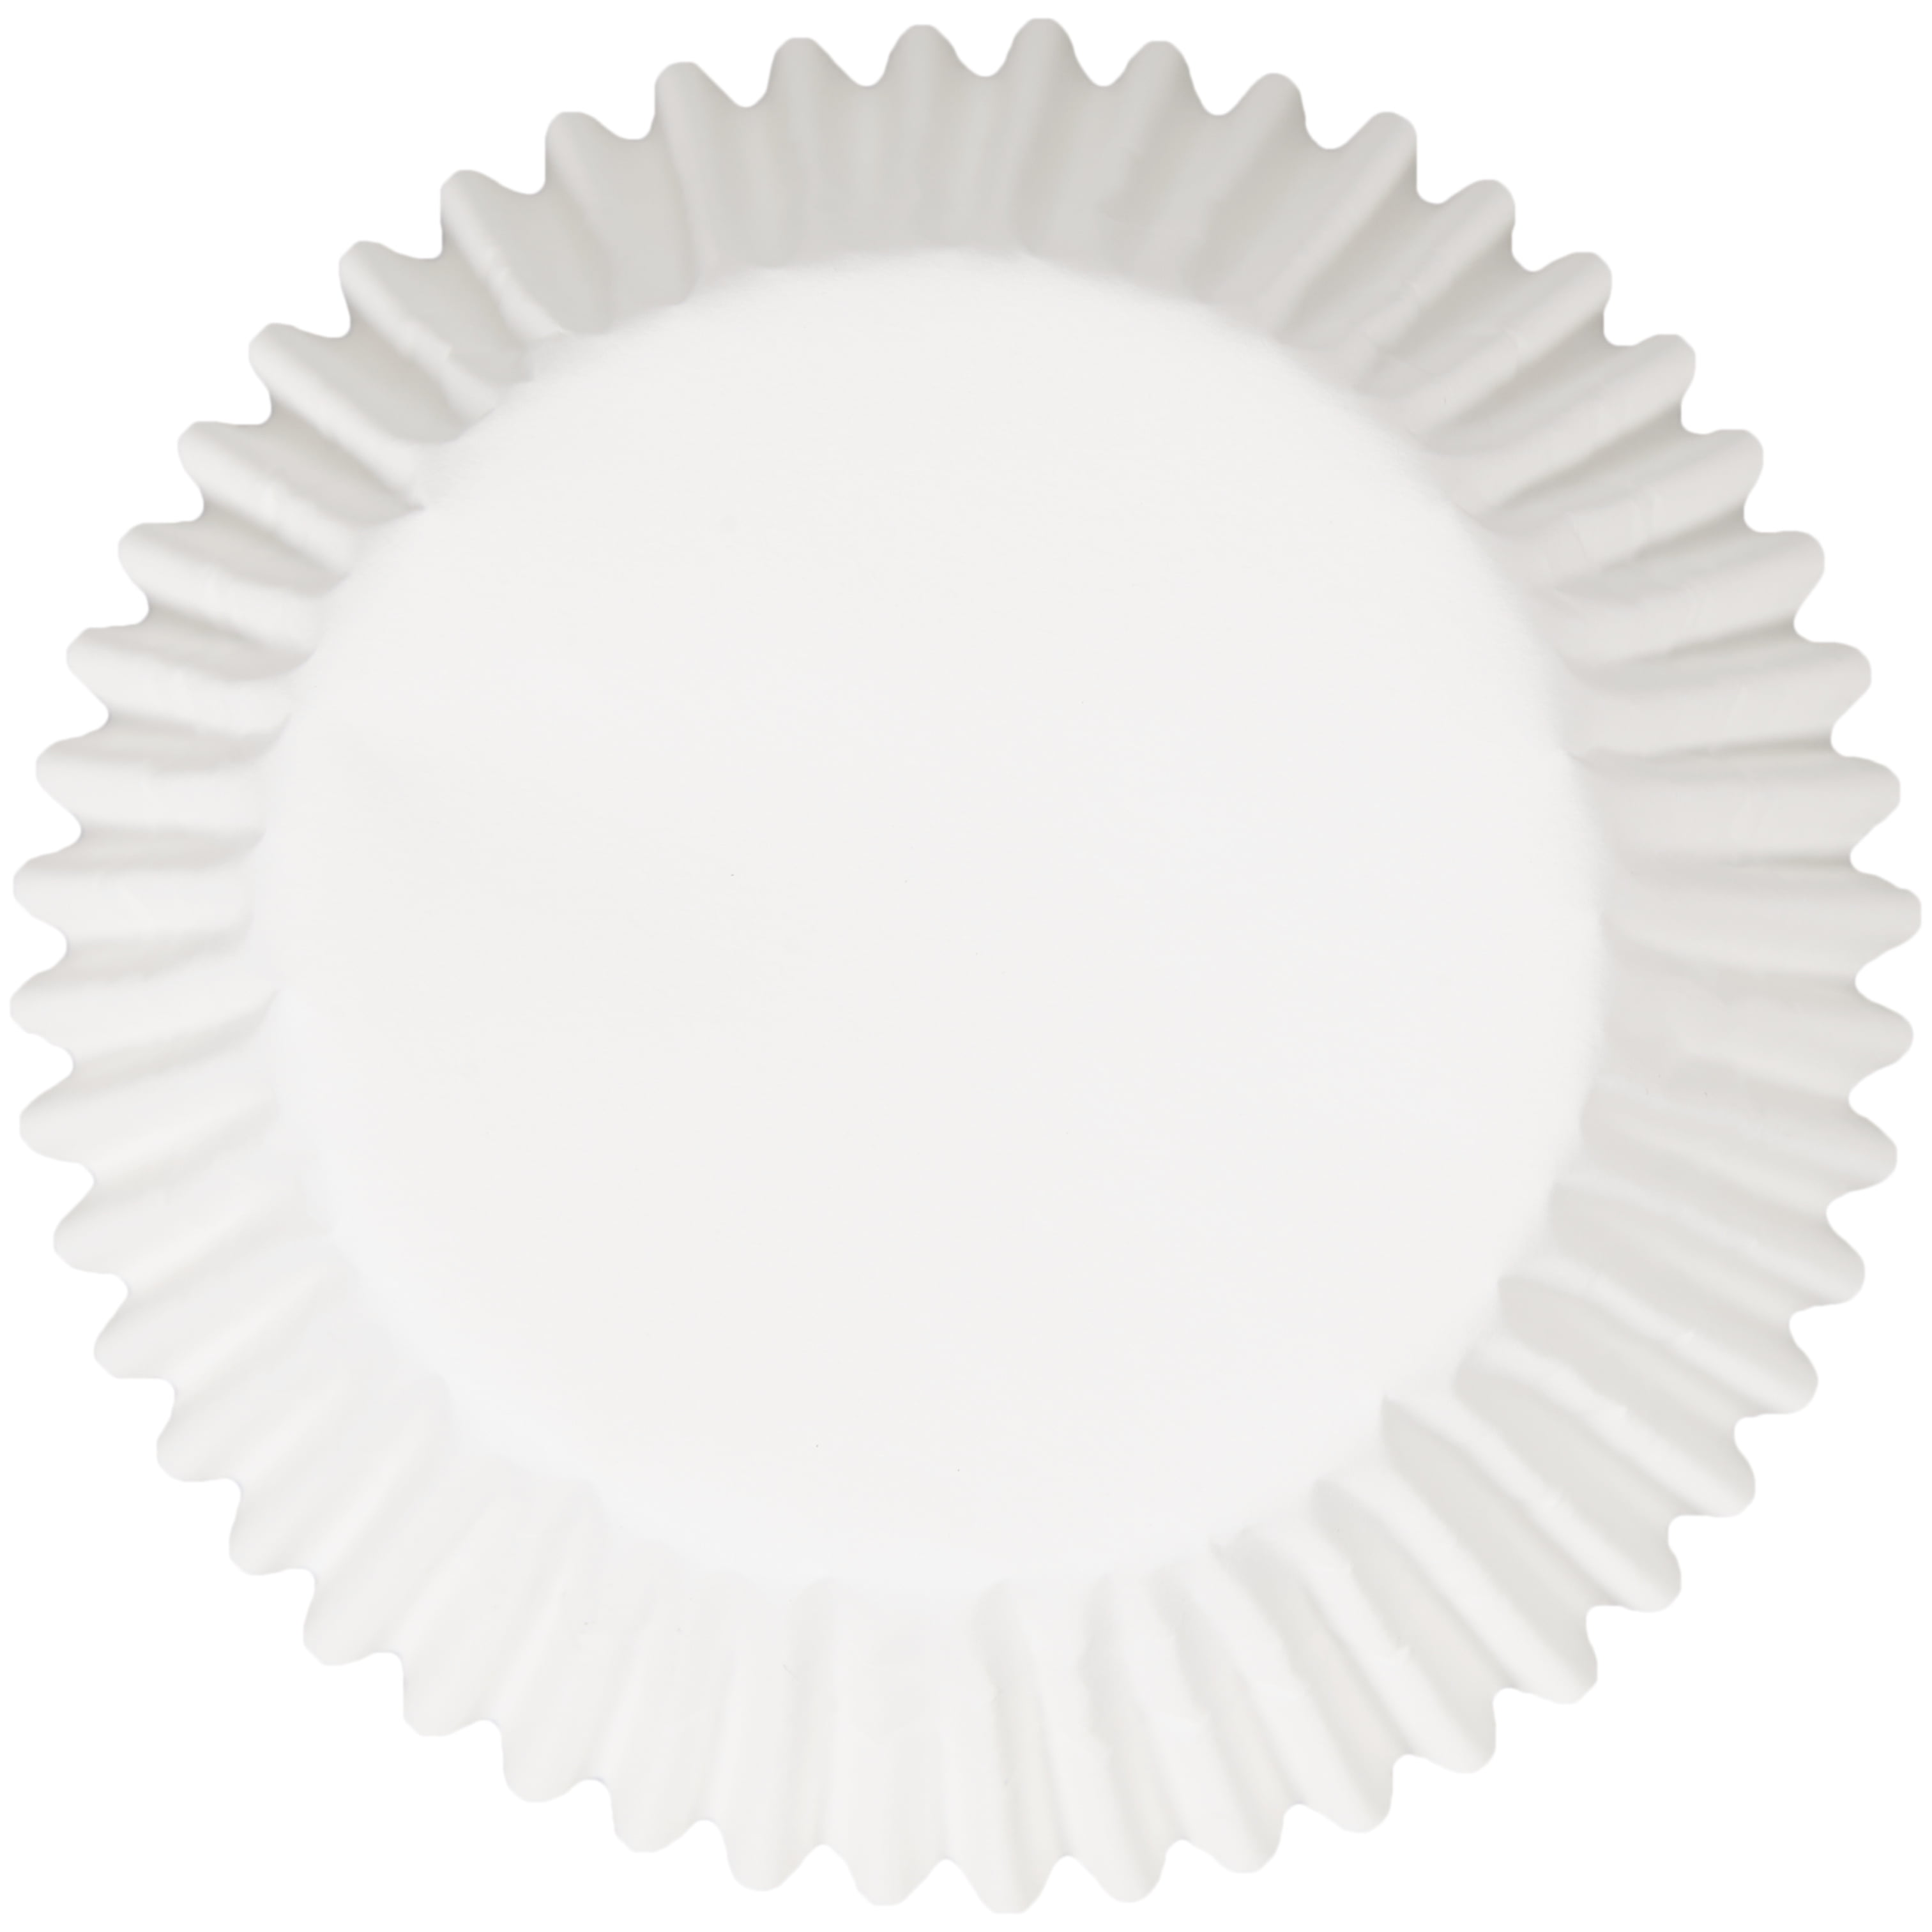 5 White Cupcake Liners, Paterson Pacific CG01011